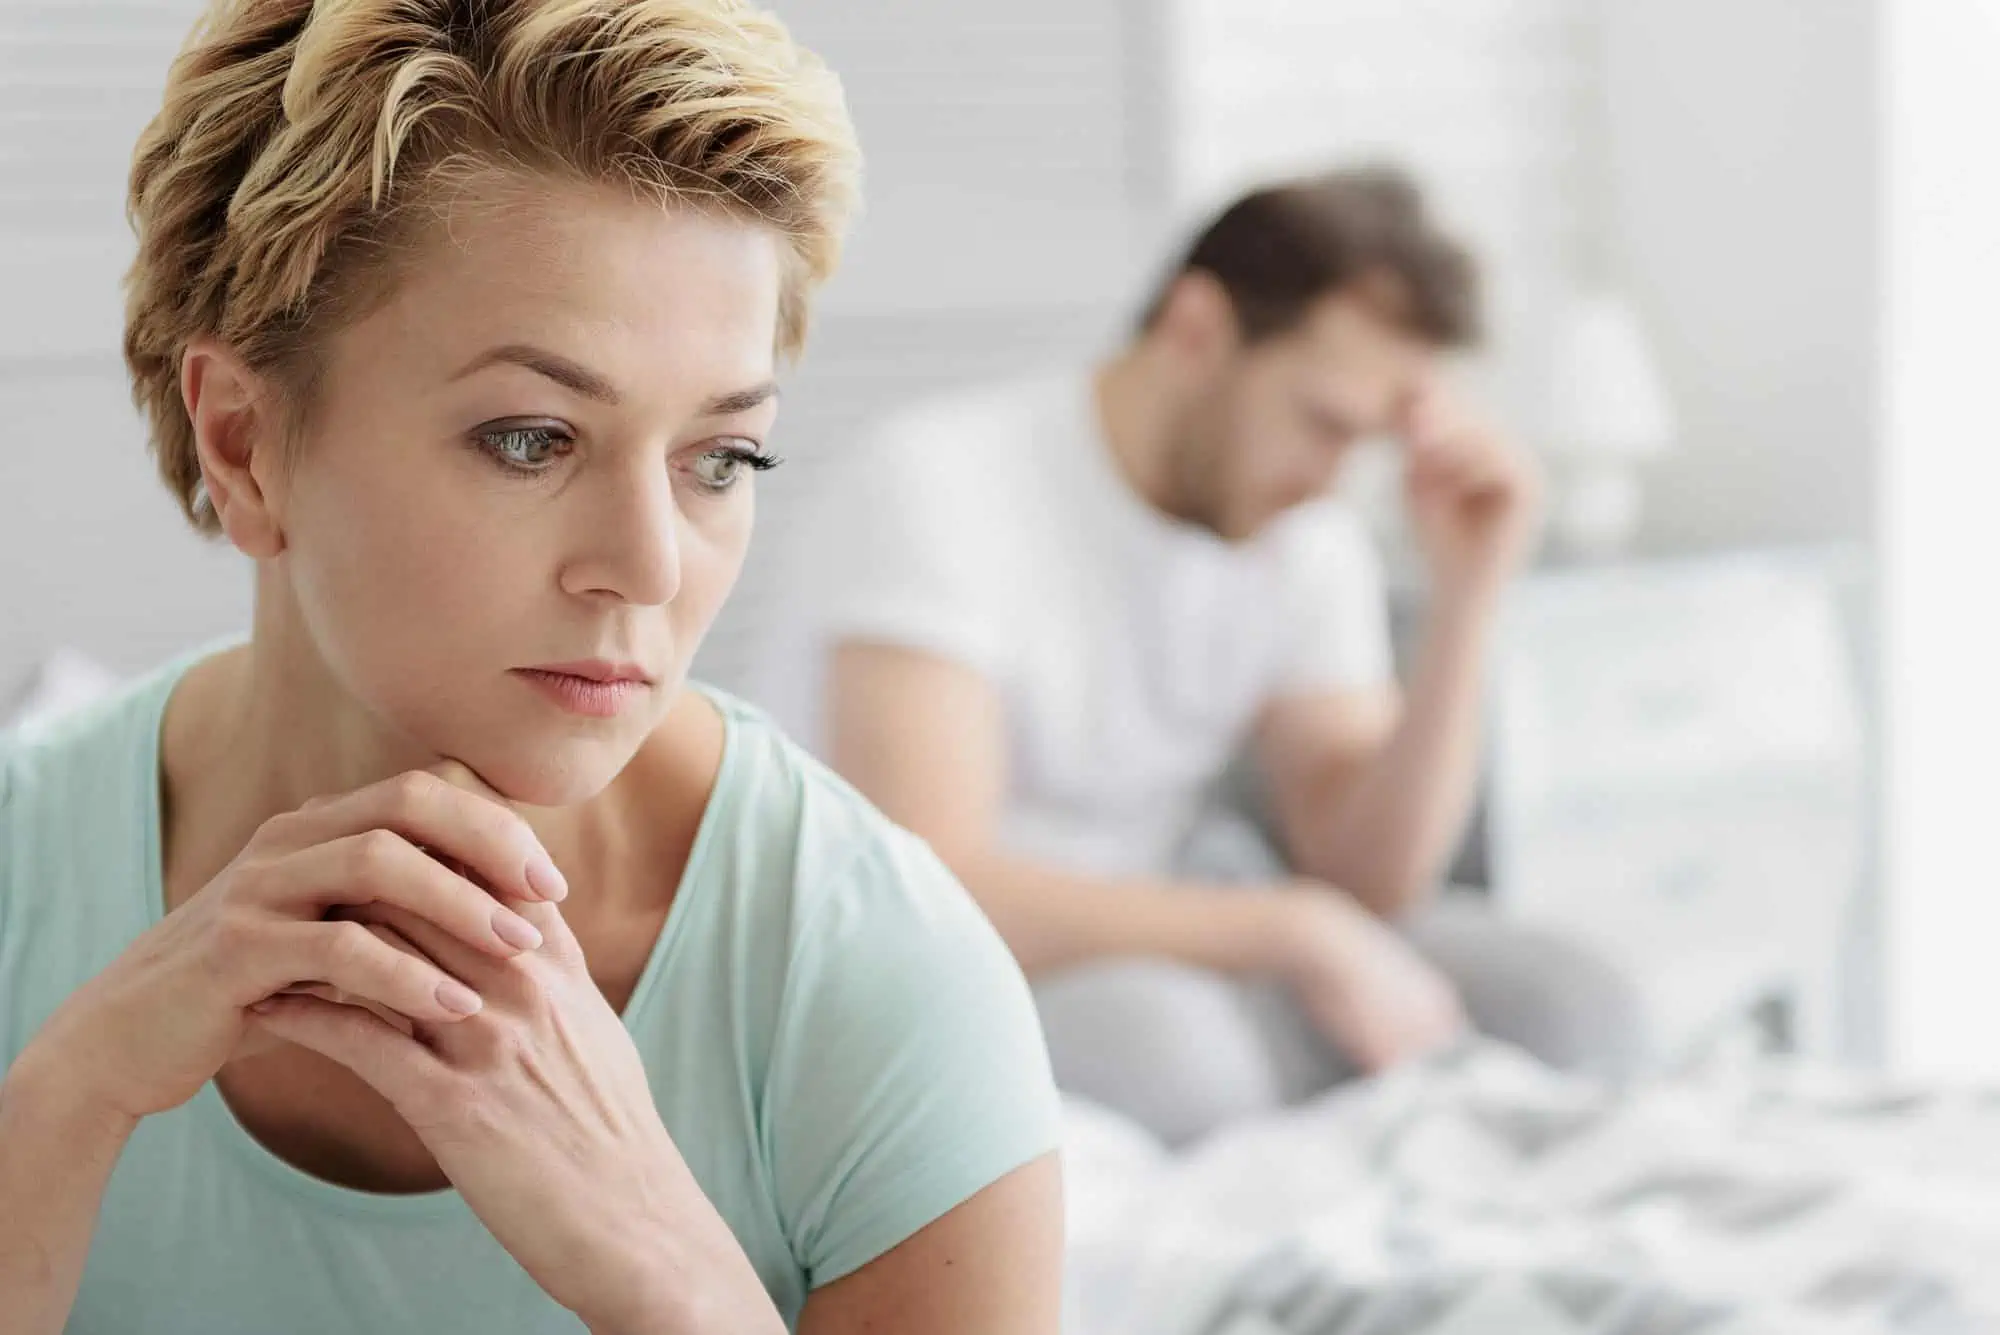 What To Do When Your Partner Doesn’t Want To Be Intimate